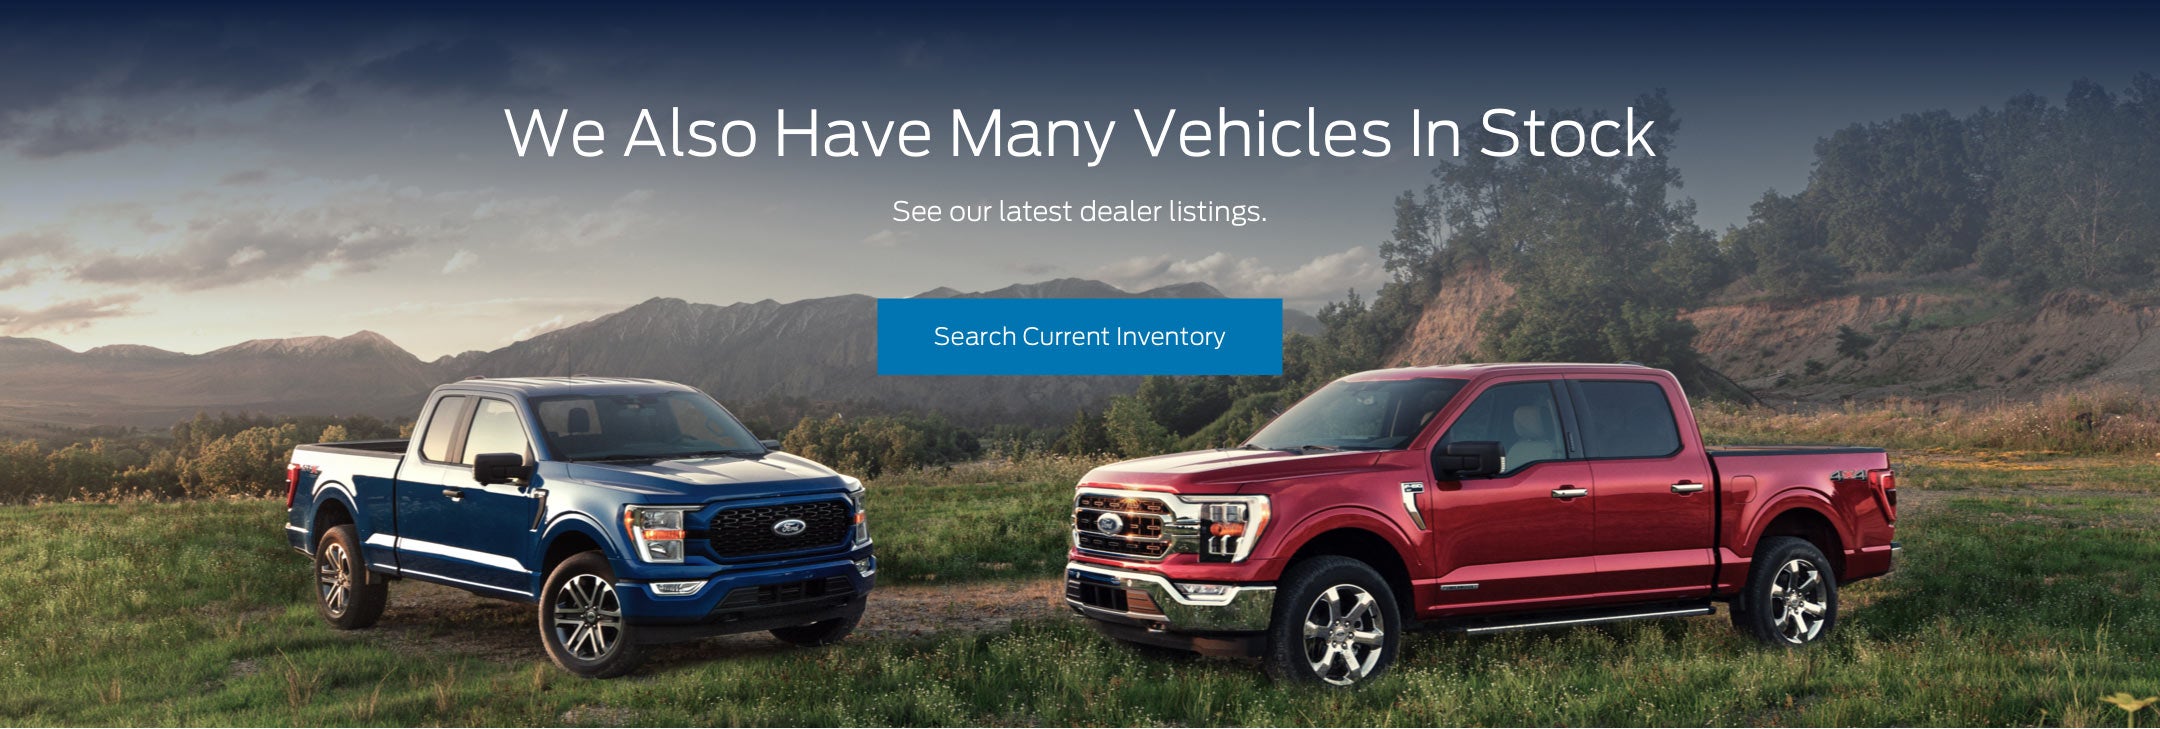 Ford vehicles in stock | Pugmire Ford of Cartersville in Cartersville GA